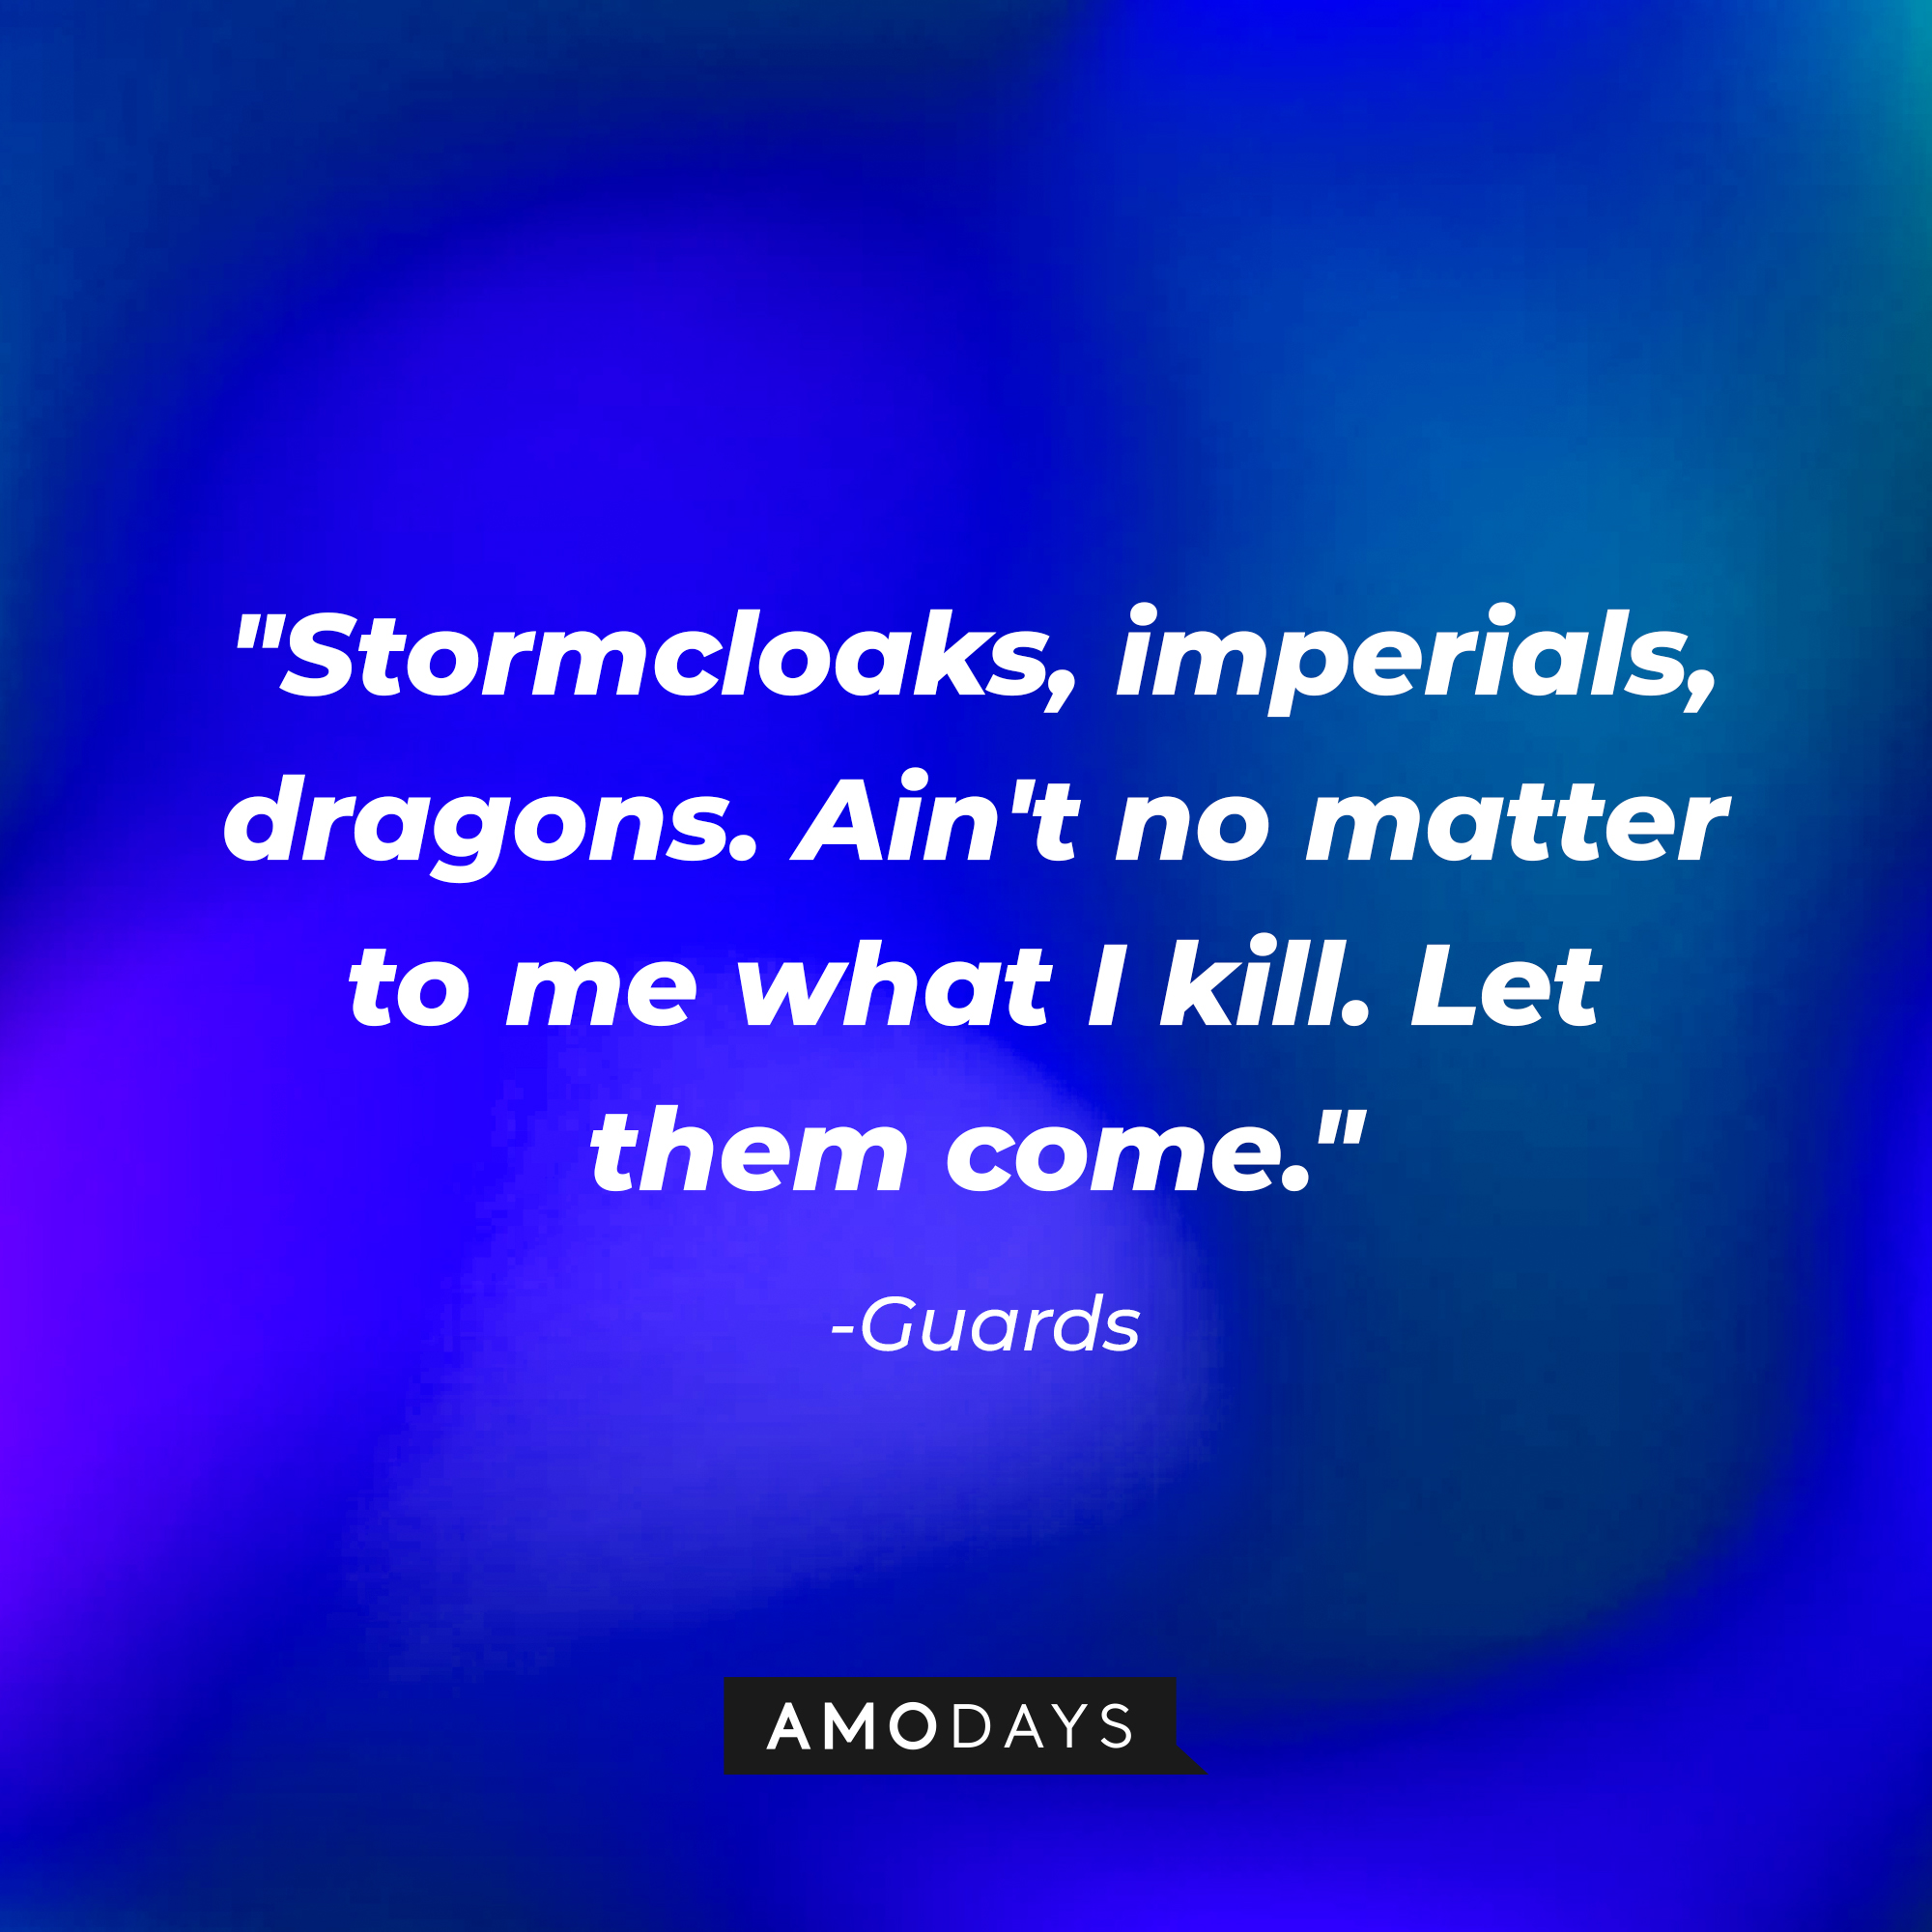 Guards' quote: "Stormcloaks, imperials, dragons. Ain't no matter to me what I kill. Let them come." | Source: Amodays